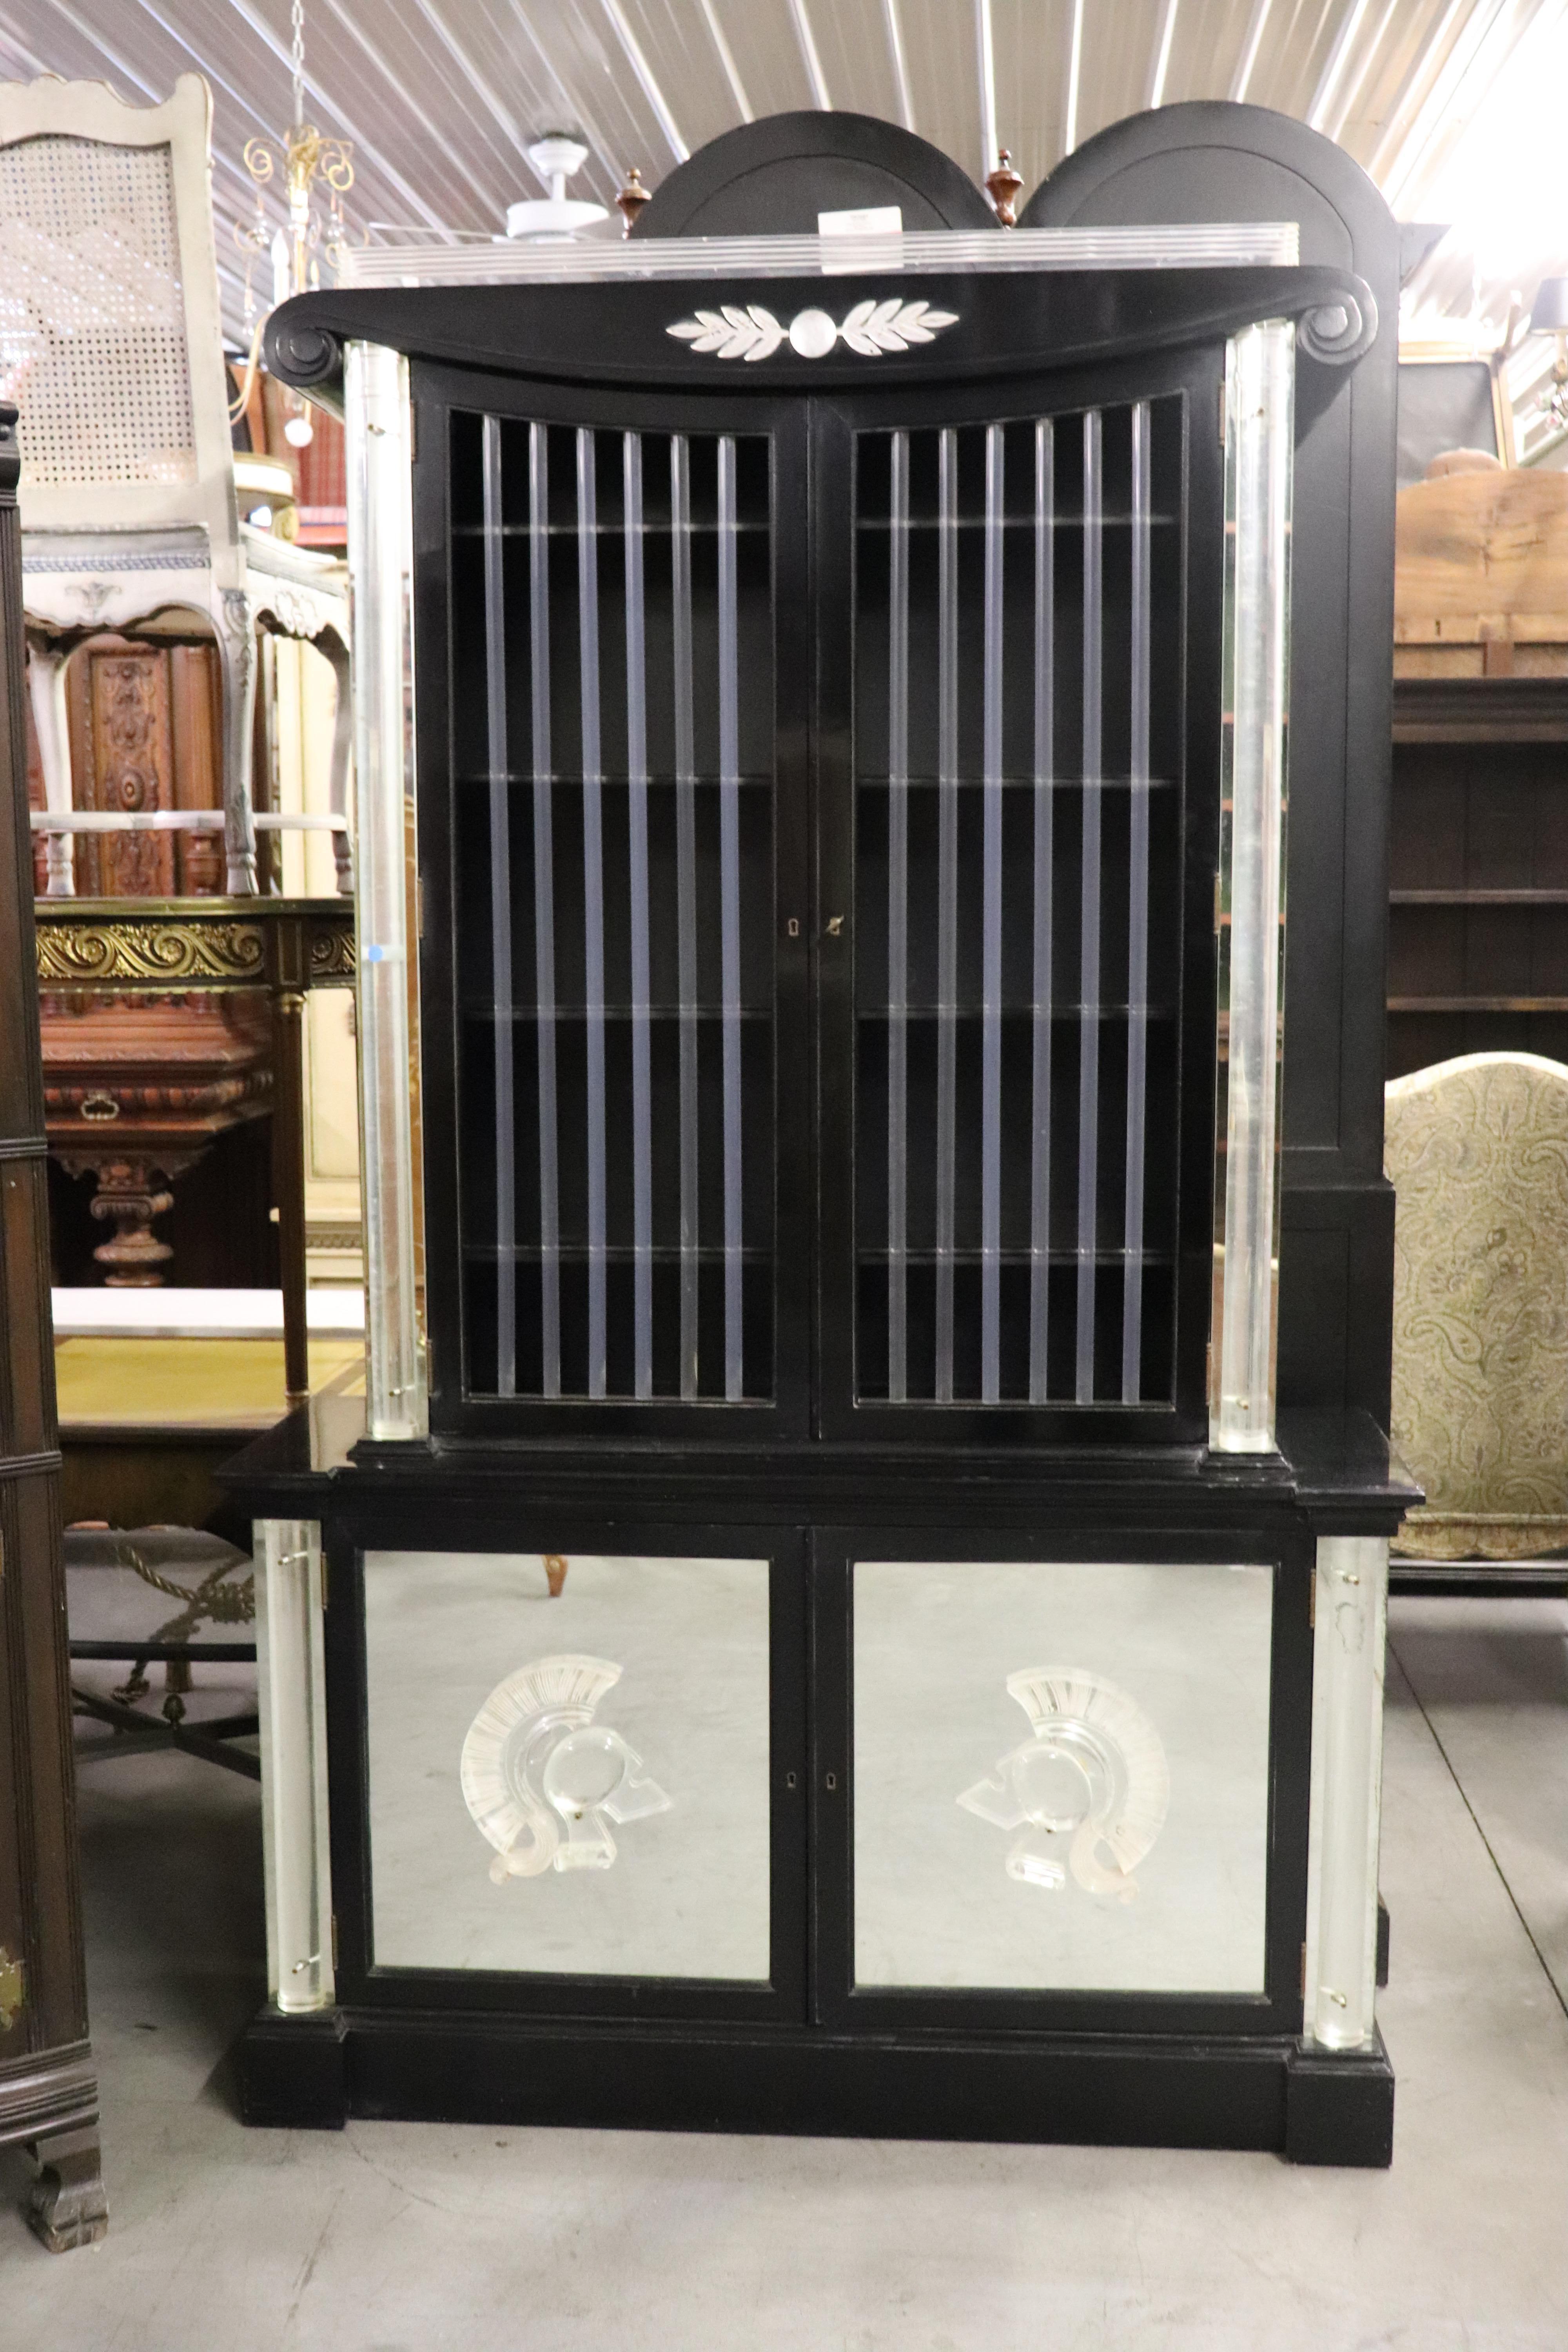 This is an original black lacquer and Lucite vitrine designed by Lorin Jackson for Grosfeld House circa 1940. The cabinet has it's original florescent lighting system and is in very good condition for its age and has no issues beyond minor wear from